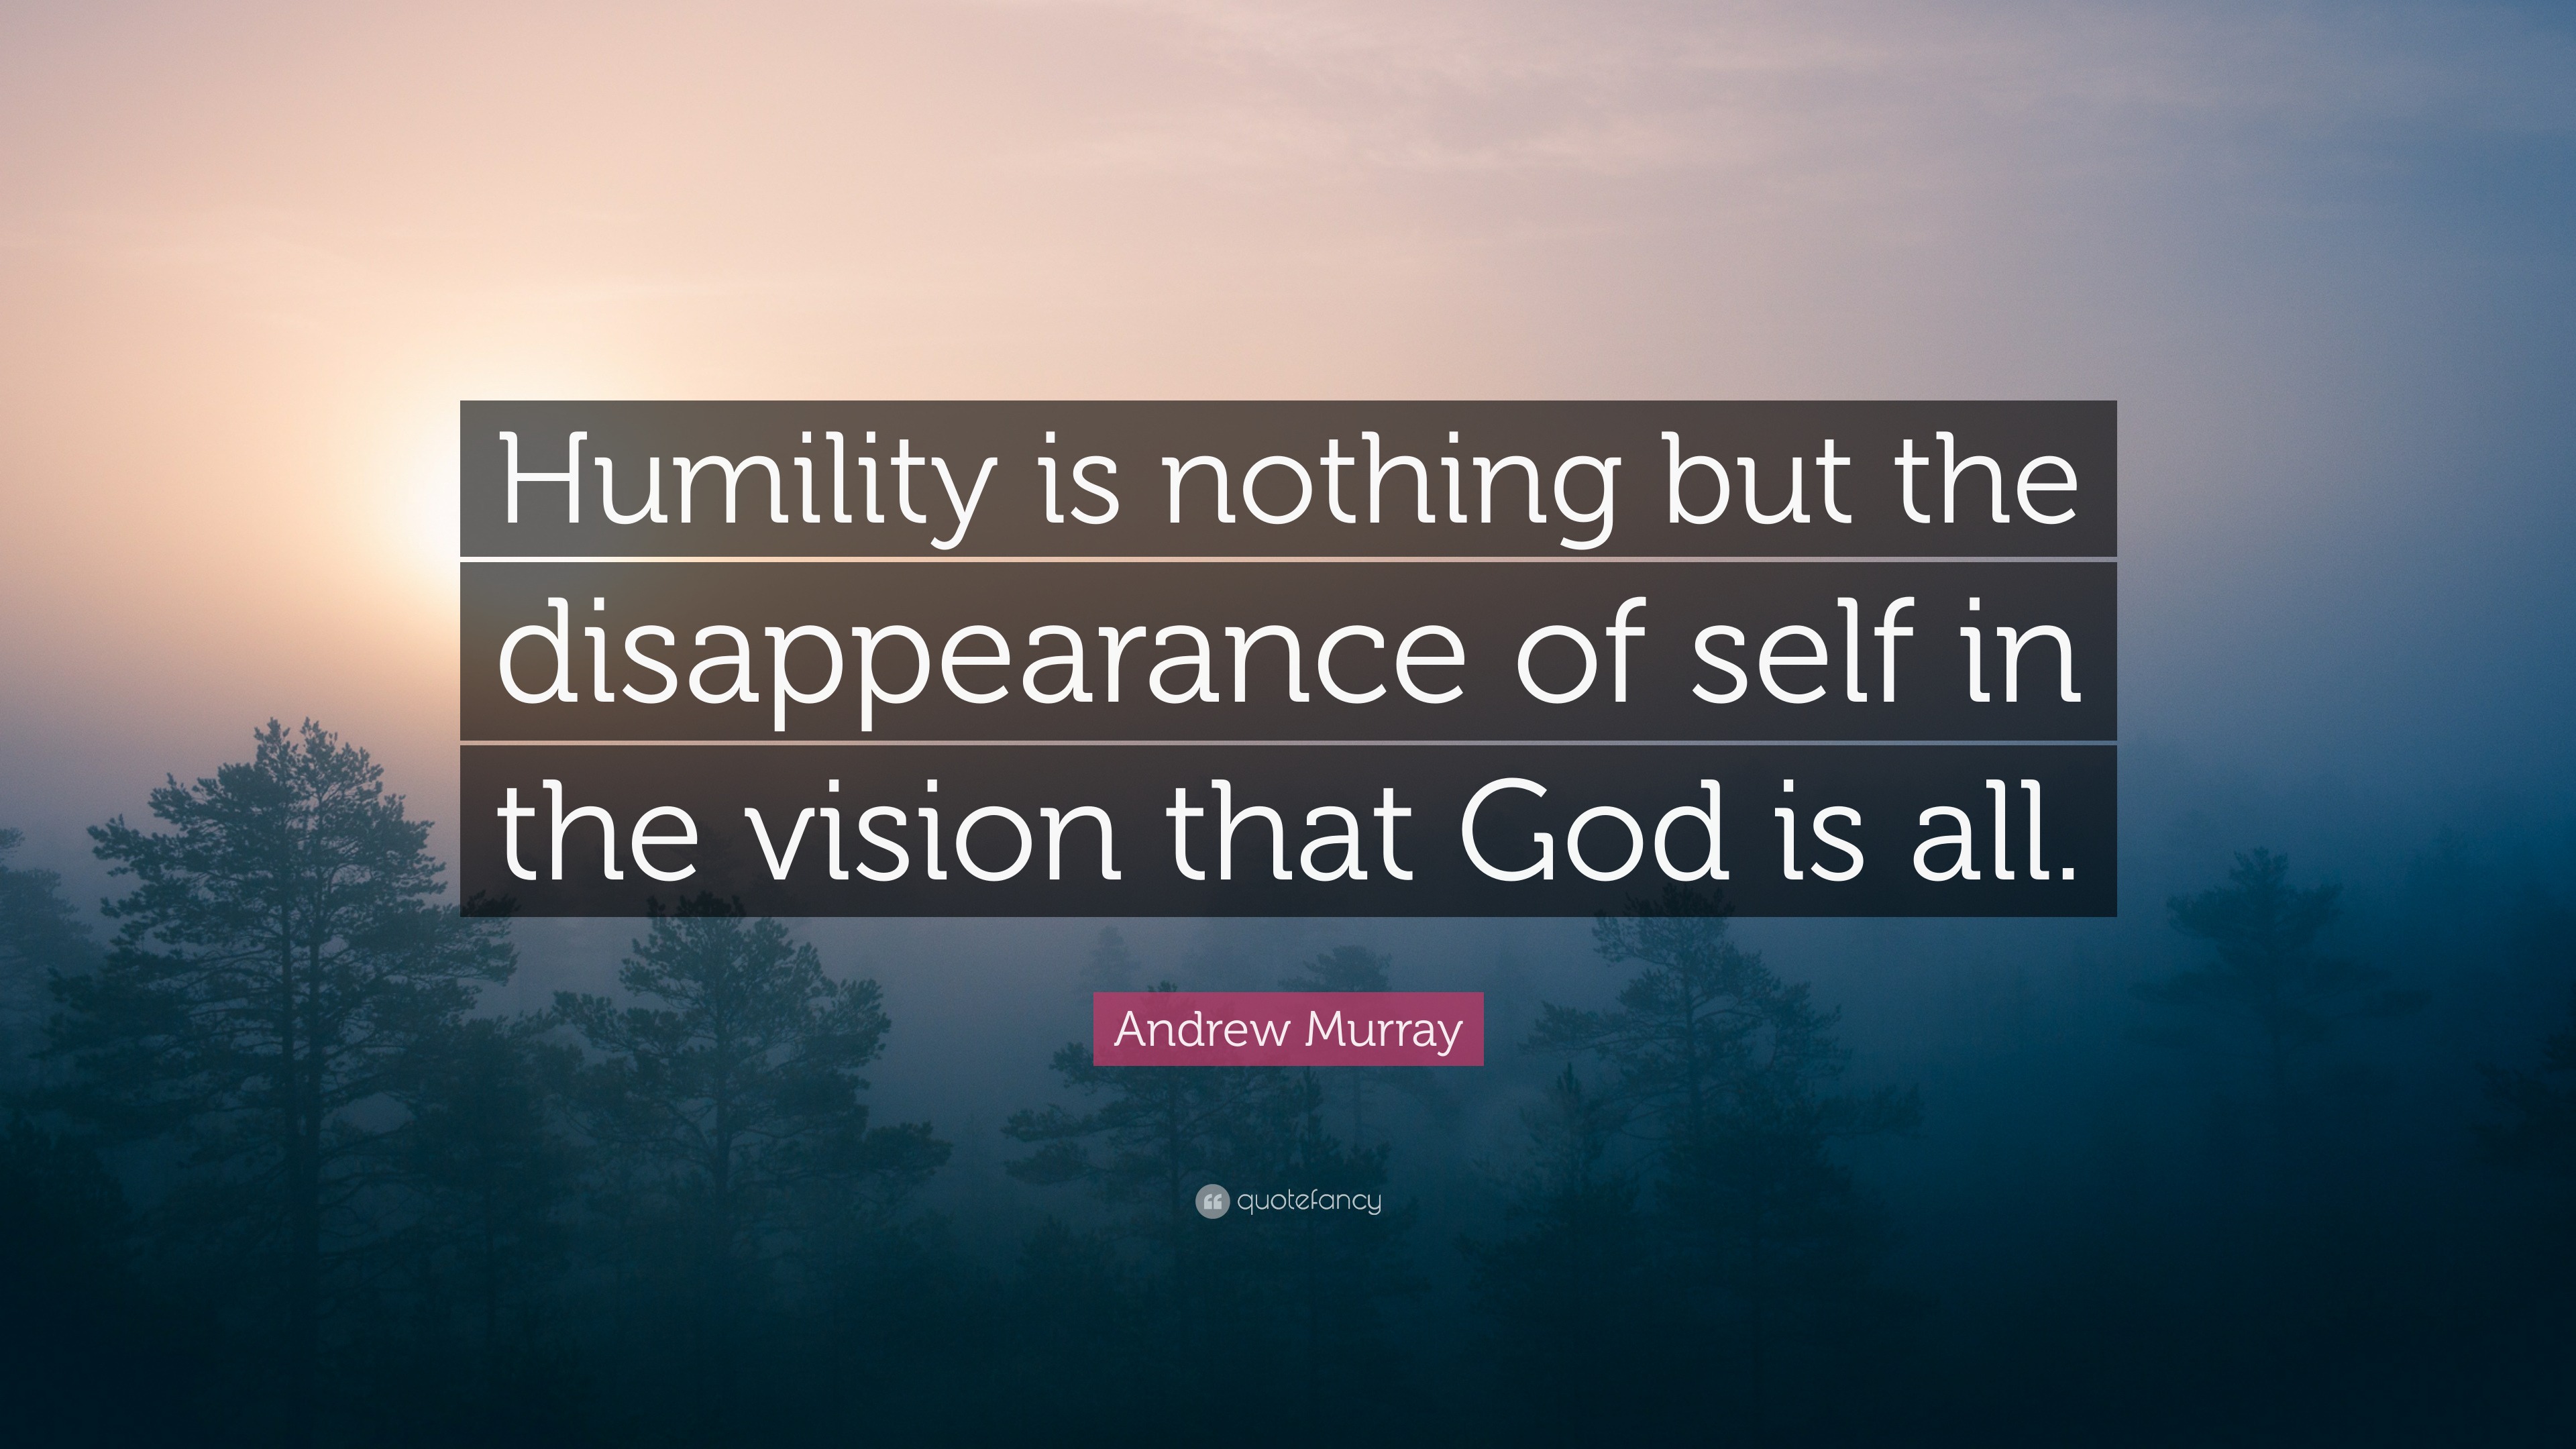 Andrew Murray Quote “Humility is nothing but the disappearance of self